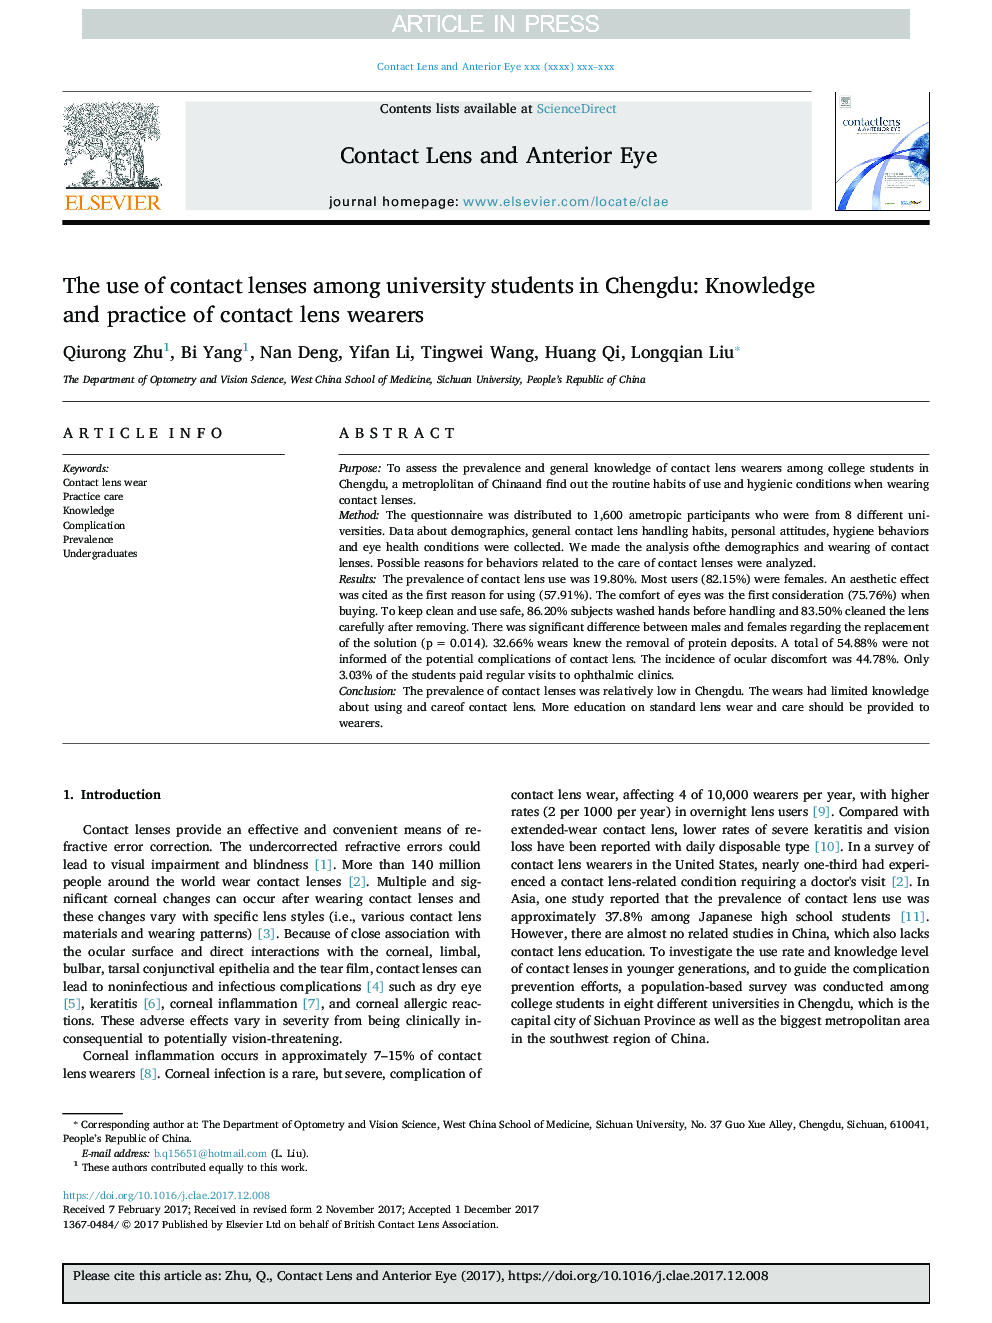 The use of contact lenses among university students in Chengdu: Knowledge and practice of contact lens wearers